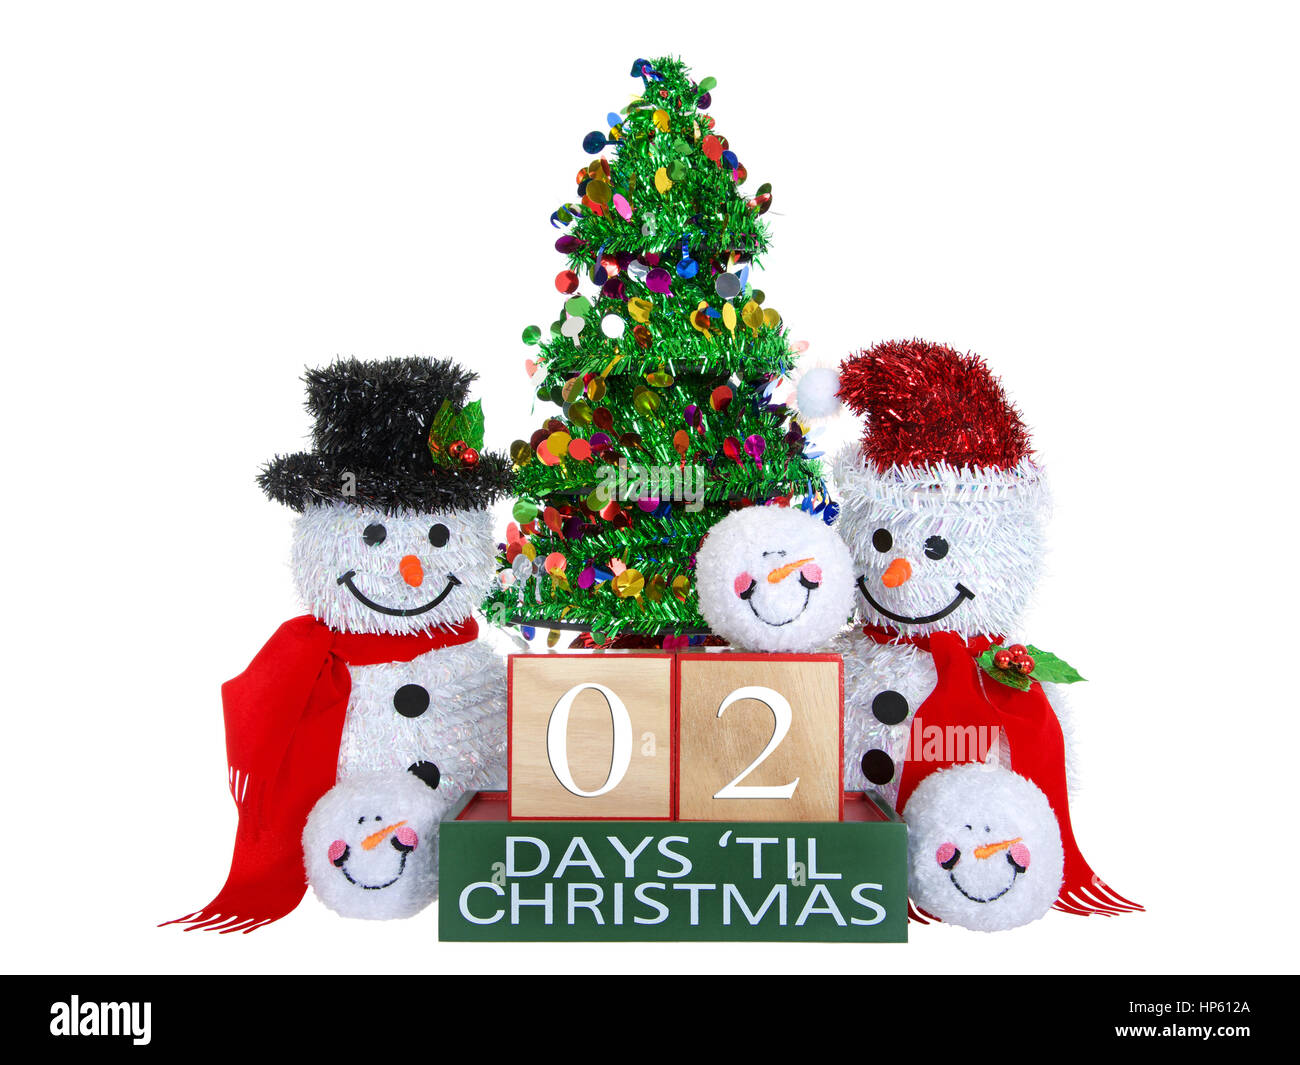 02 Days until Christmas light beech wood blocks with red trim on a green base with tinsel christmas tree, mr and mrs snowman and snowball snowmen head Stock Photo